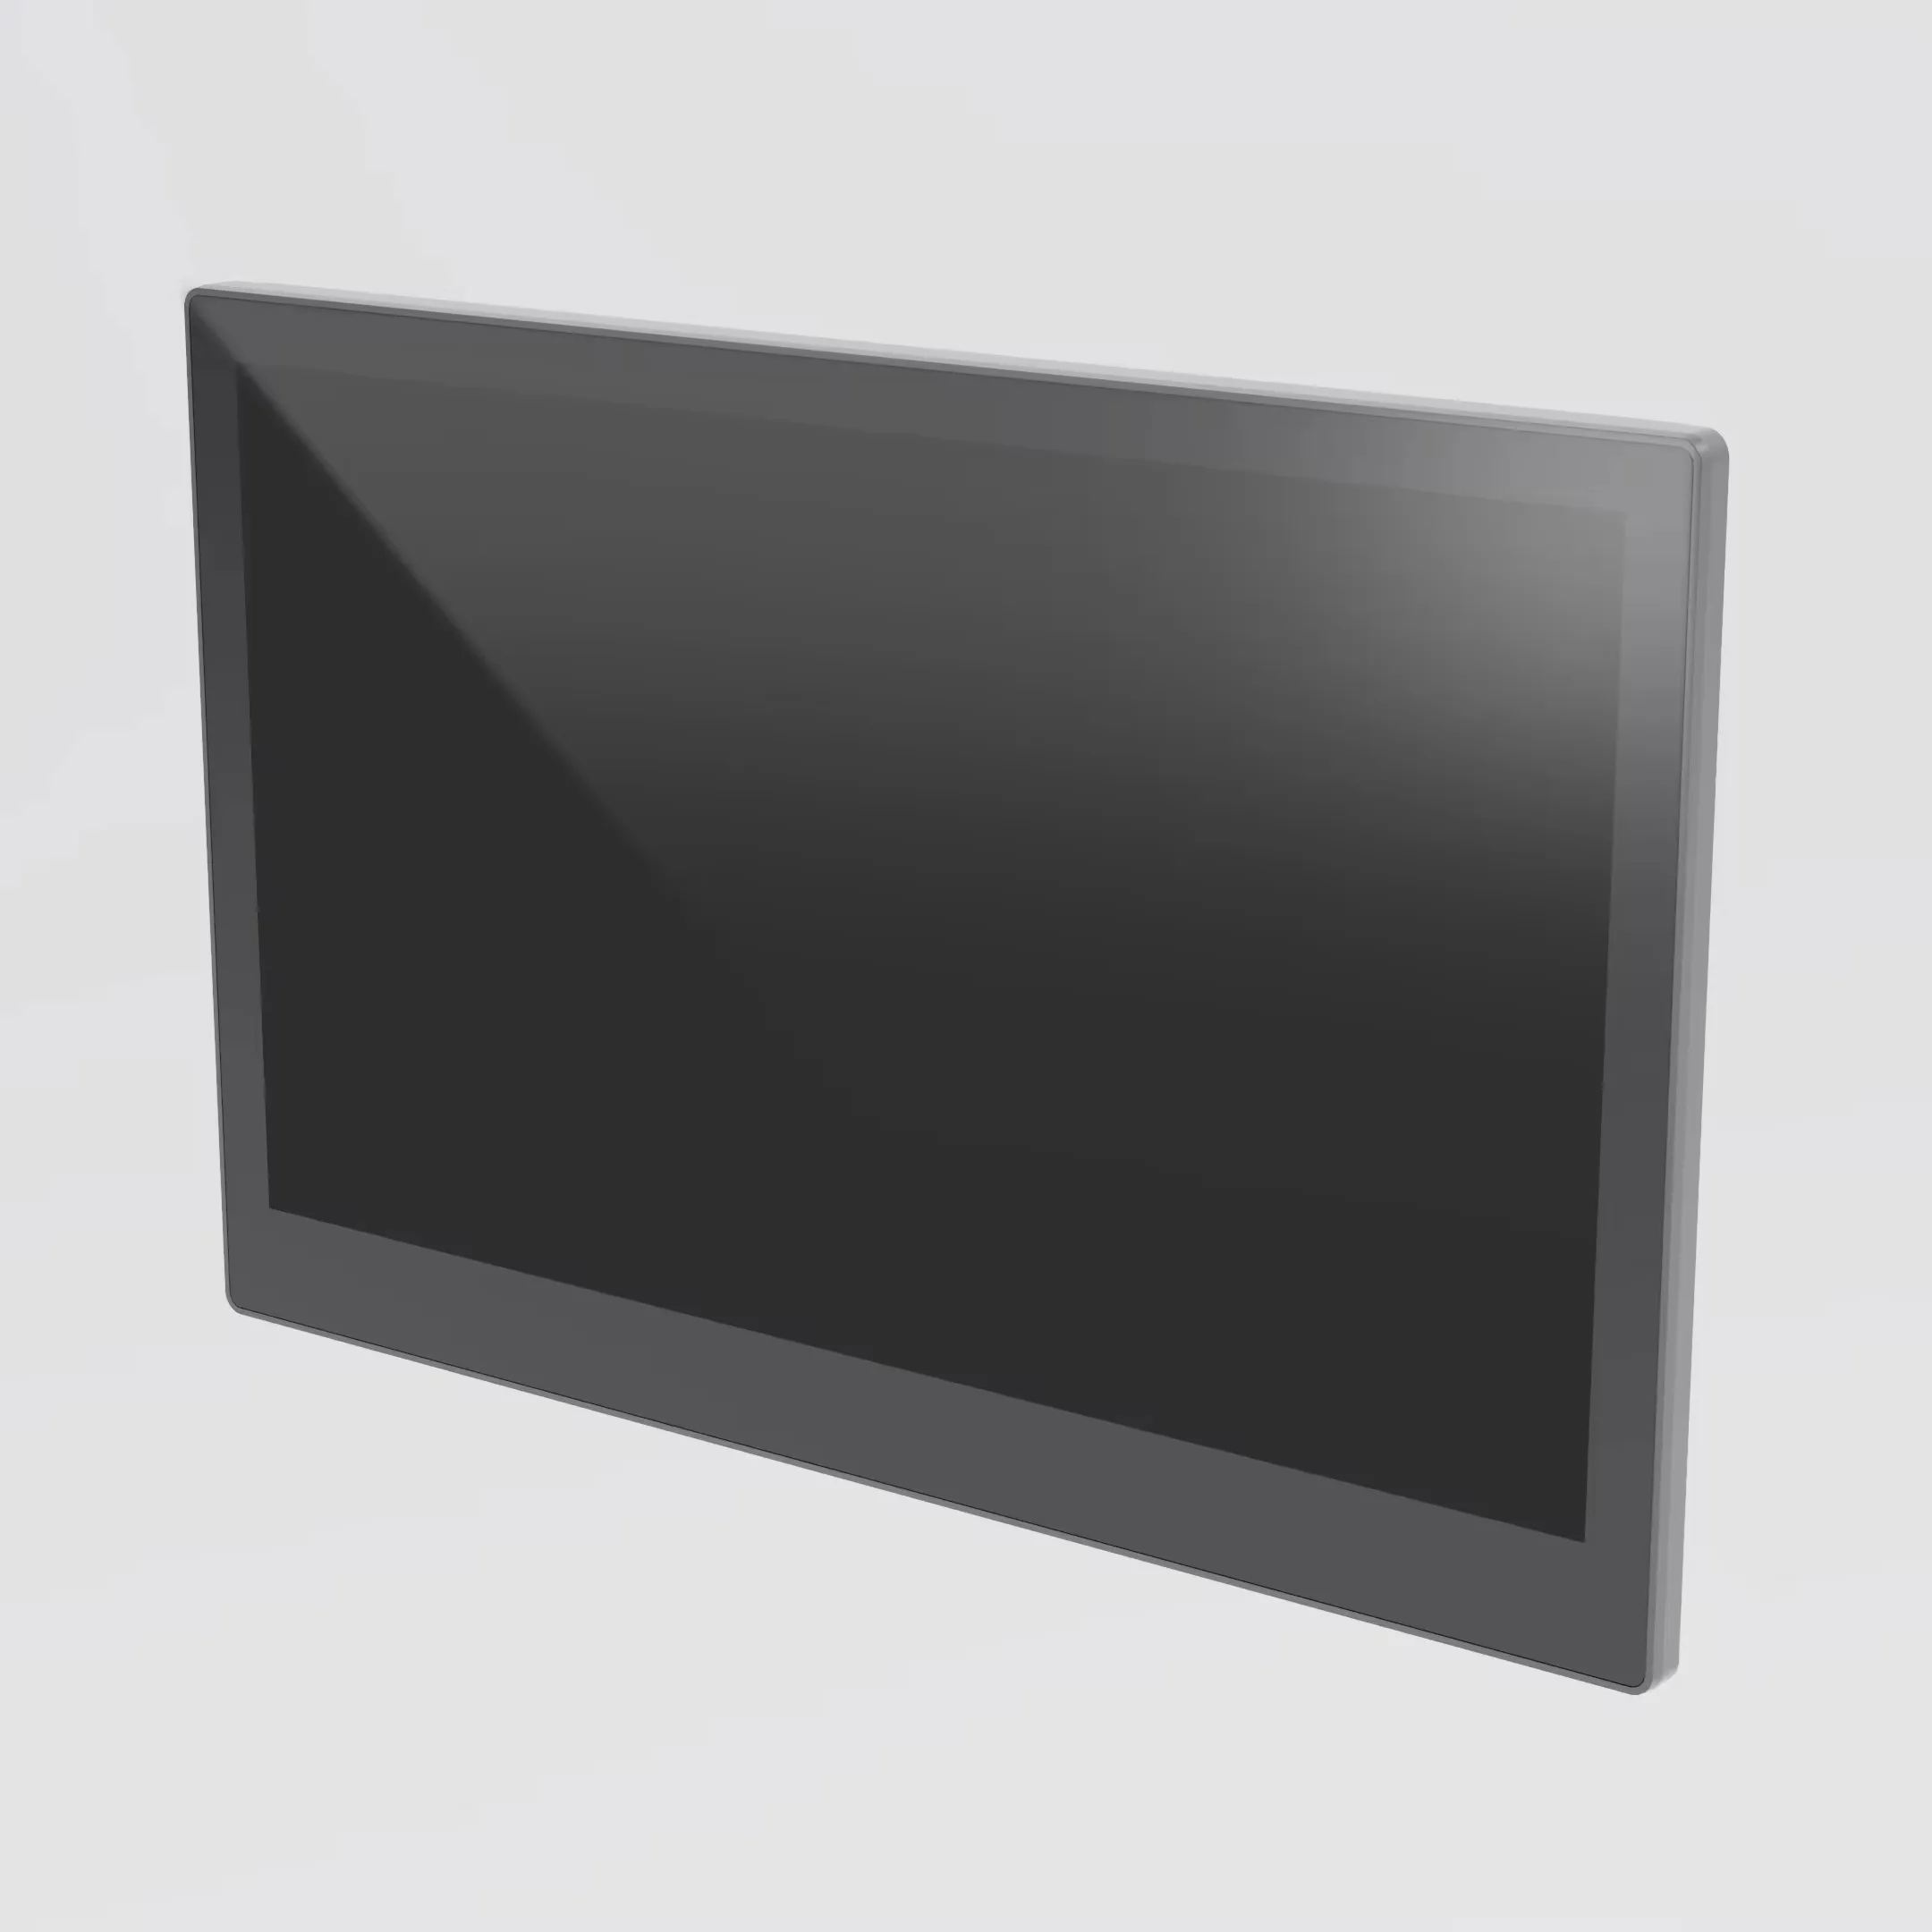 REAL KDS for kitchen display 15.6" 21.5" touch screen